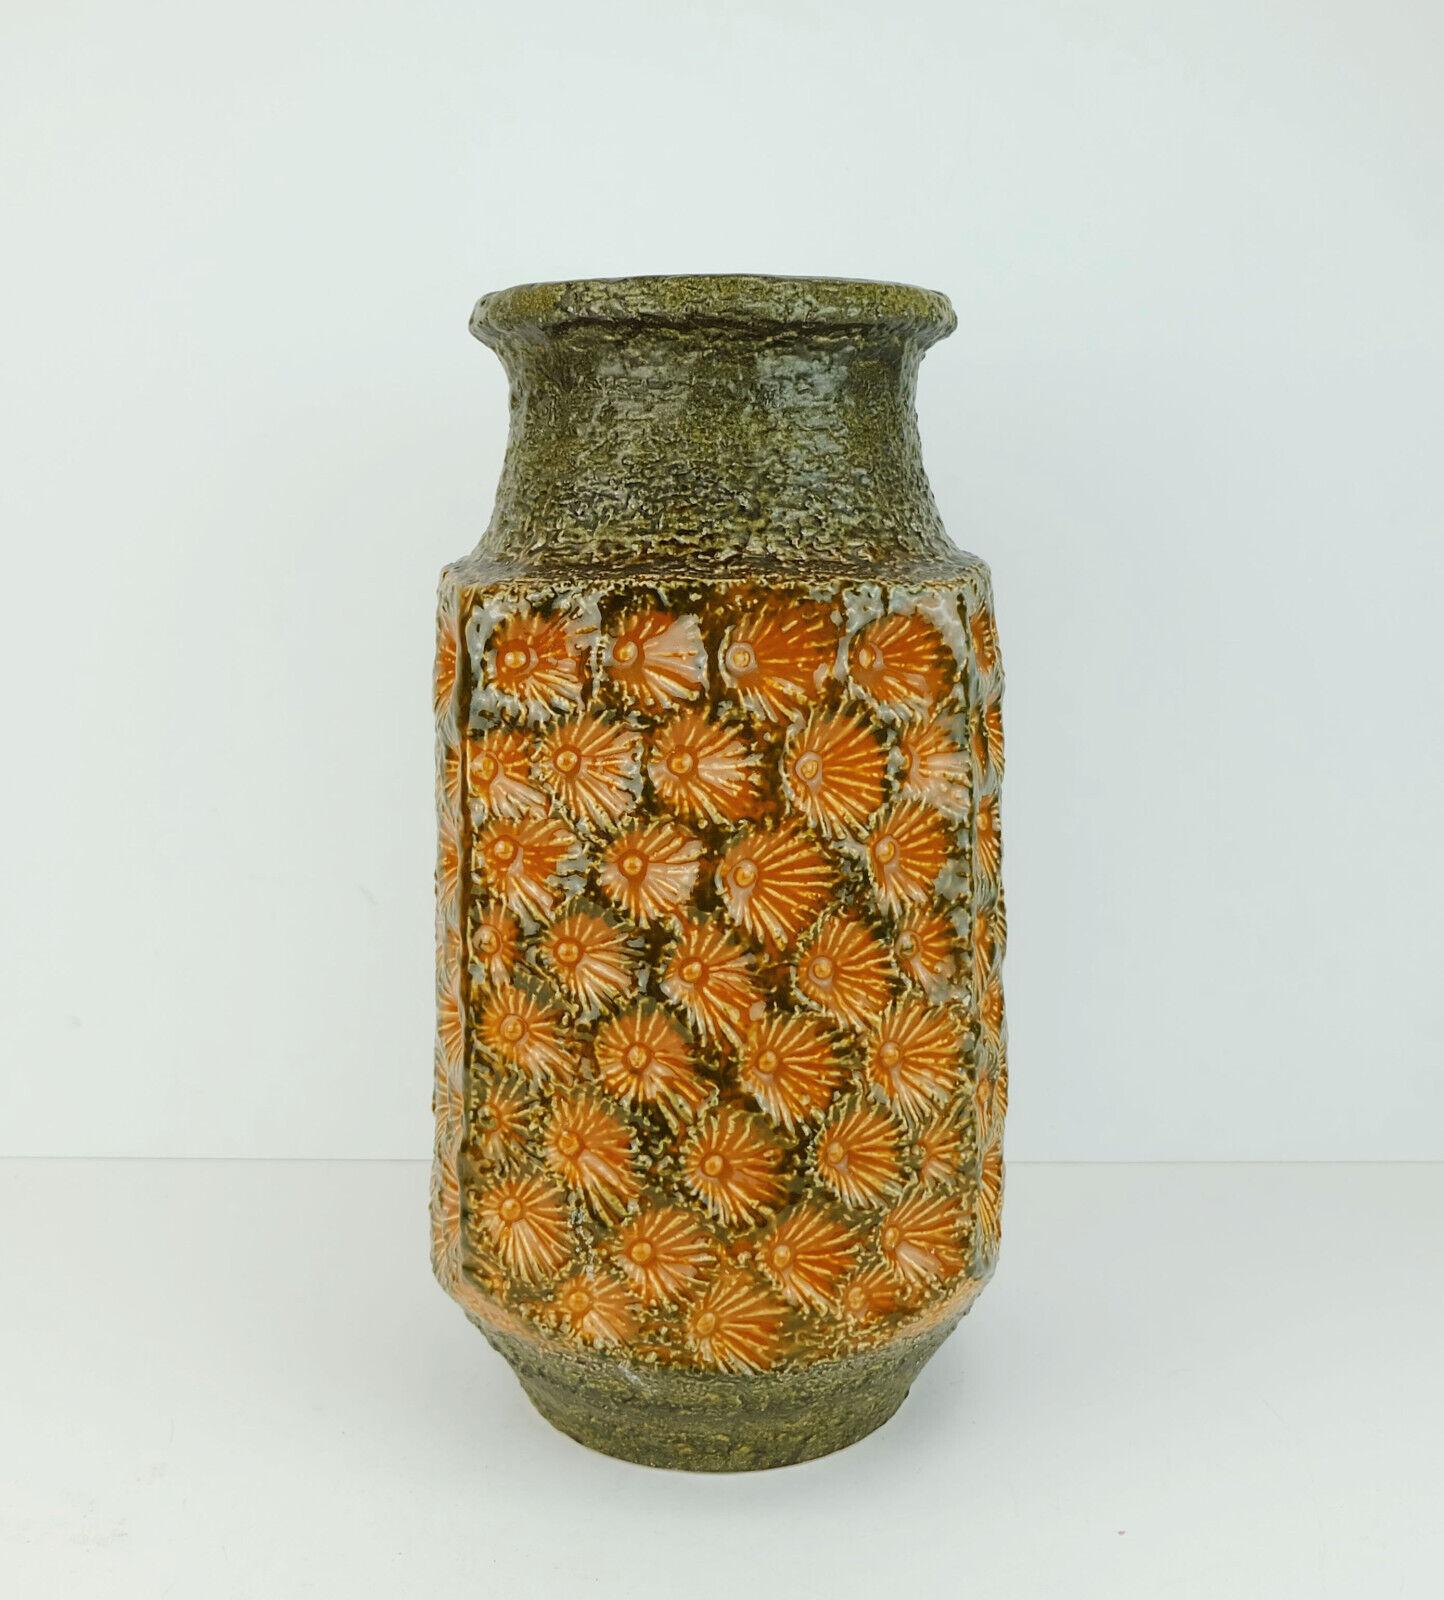 Very beautiful large mid century floor vase manufactured by Jasba-Keramik West-Germany in the 1960s. Relief decoration of stylized flowers in orange, olive green and light beige on all four sides. Above and below relief surface in shades of green